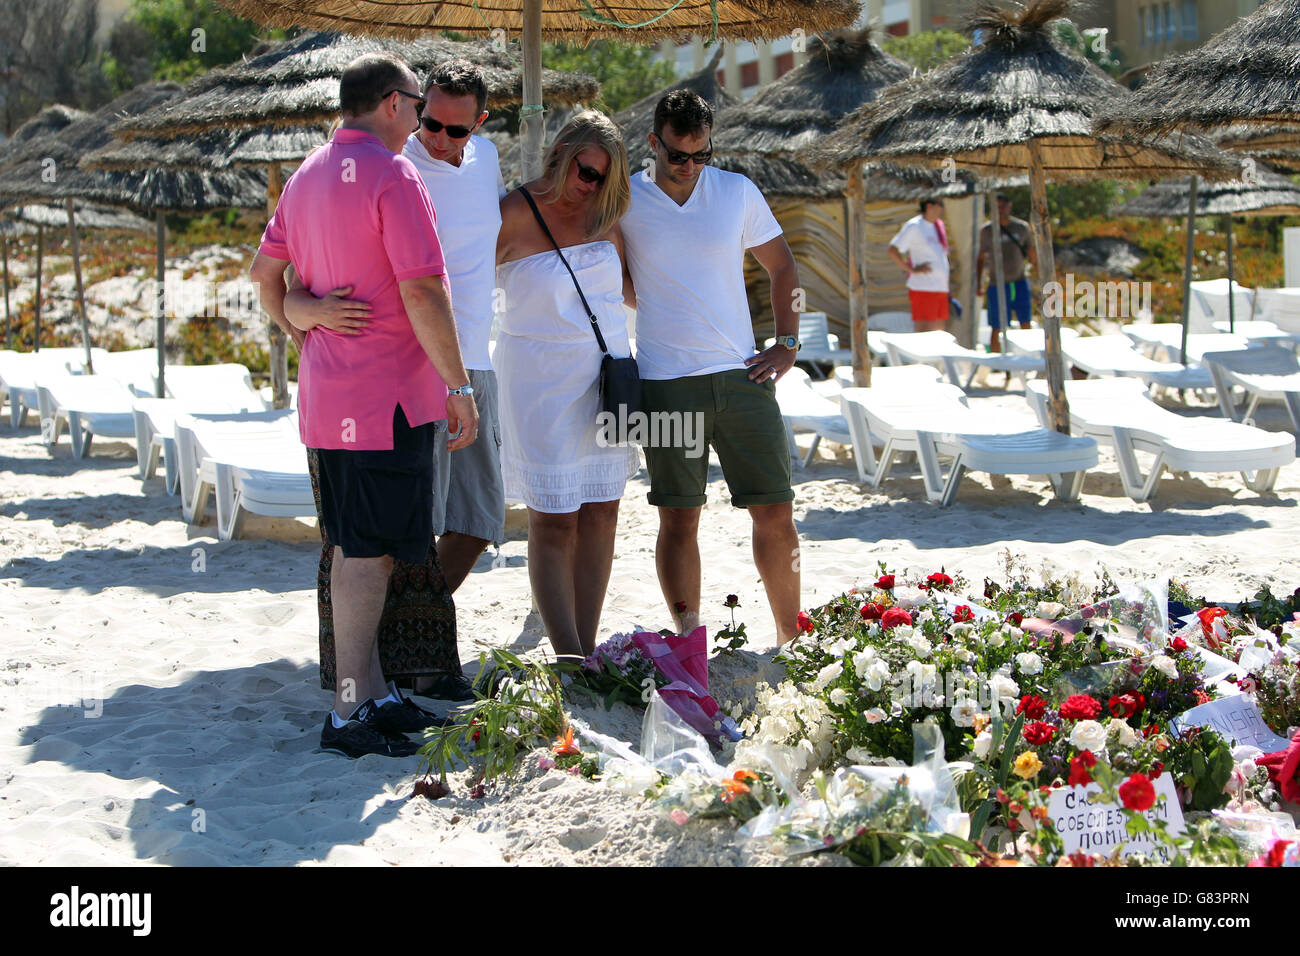 People pay their respects on the beach near the RIU Imperial Marhaba hotel in Sousse, Tunisia, as British holidaymakers defy the terrorists and continue to stay in Sousse despite the bloodbath on the beach. PRESS ASSOCIATION Photo. Picture date: Tuesday June 30, 2015. The sands at Sousse were quiet and calm today as tourists and locals alike continued to pay their respects to the 38 dead outside the RIU Imperial Marhaba and Bellevue hotels. Flowers continue to be laid at three heart-shaped memorials that mark where so many people lost their lives, with many people in tears as they read the Stock Photo